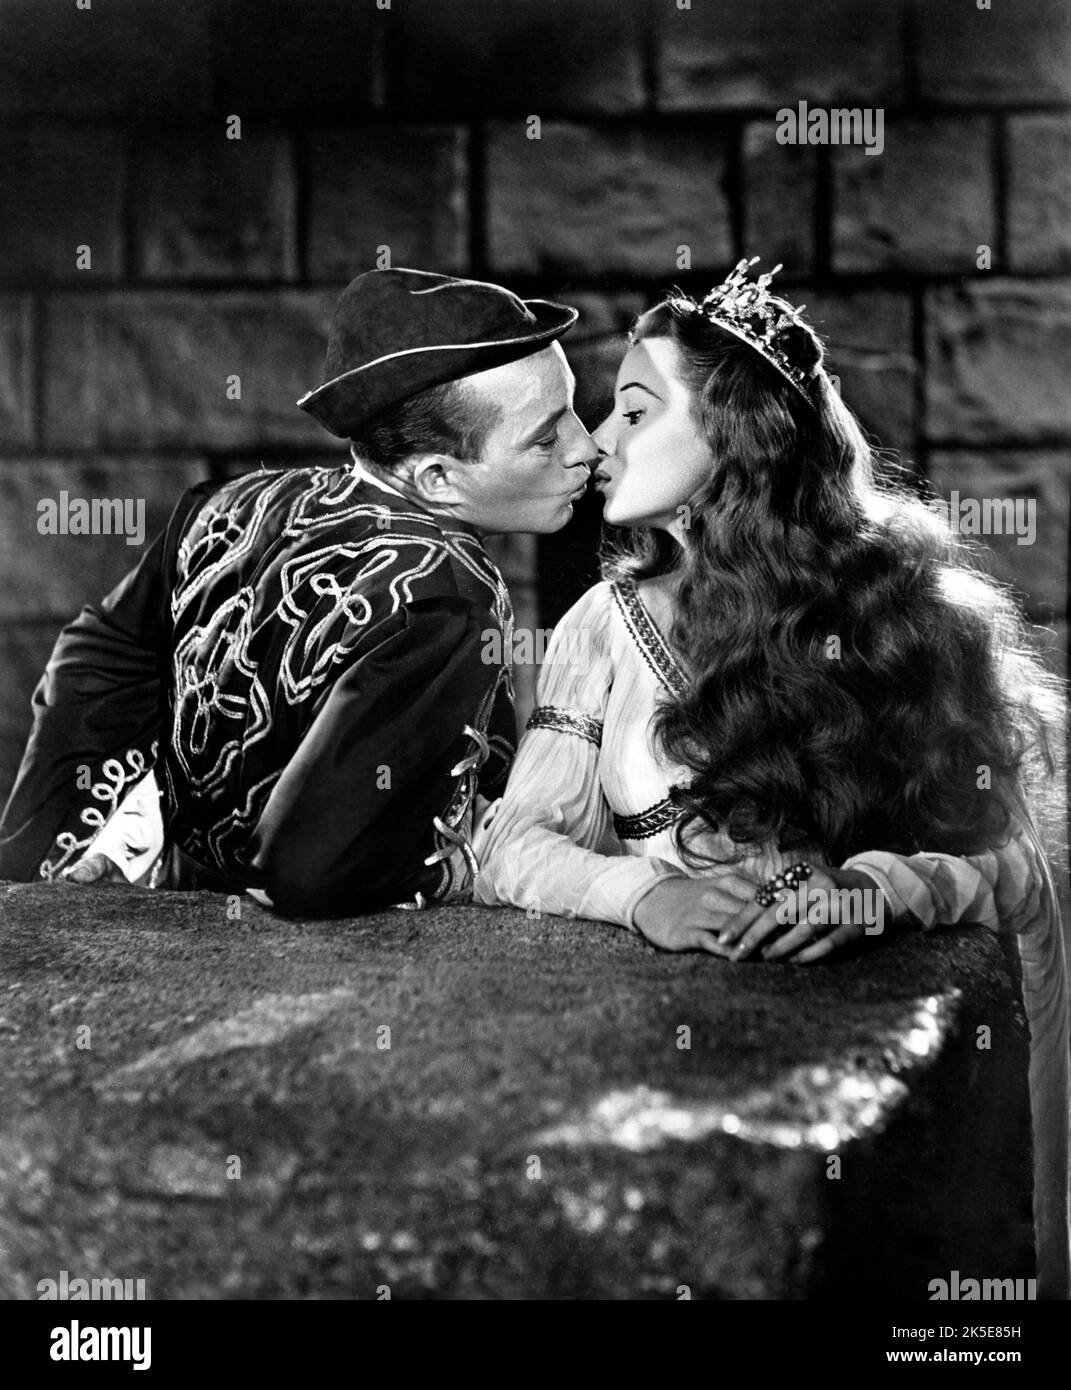 Bing Crosby, Rhonda Fleming, on-set of the Film, 'A Connecticut Yankee In King Arthur's Court', Paramount Pictures, 1949 Stock Photo